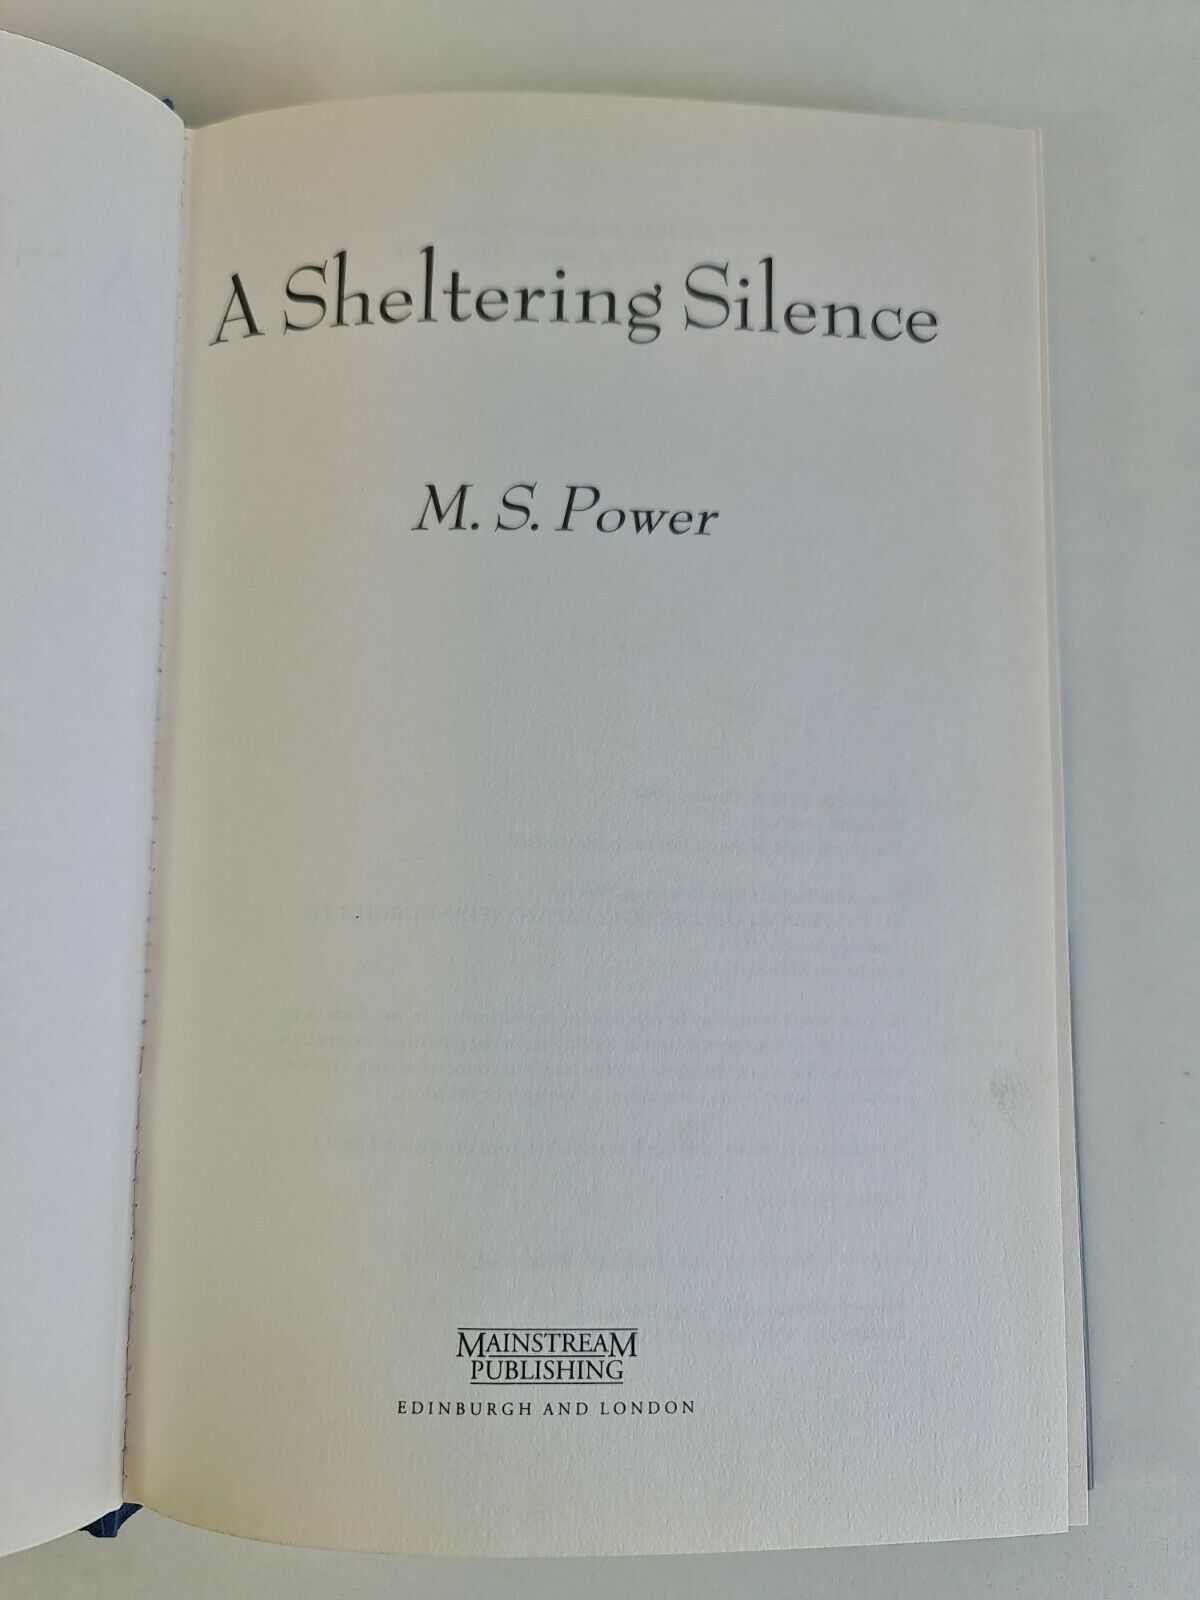 A Sheltering Silence by M.S. Power